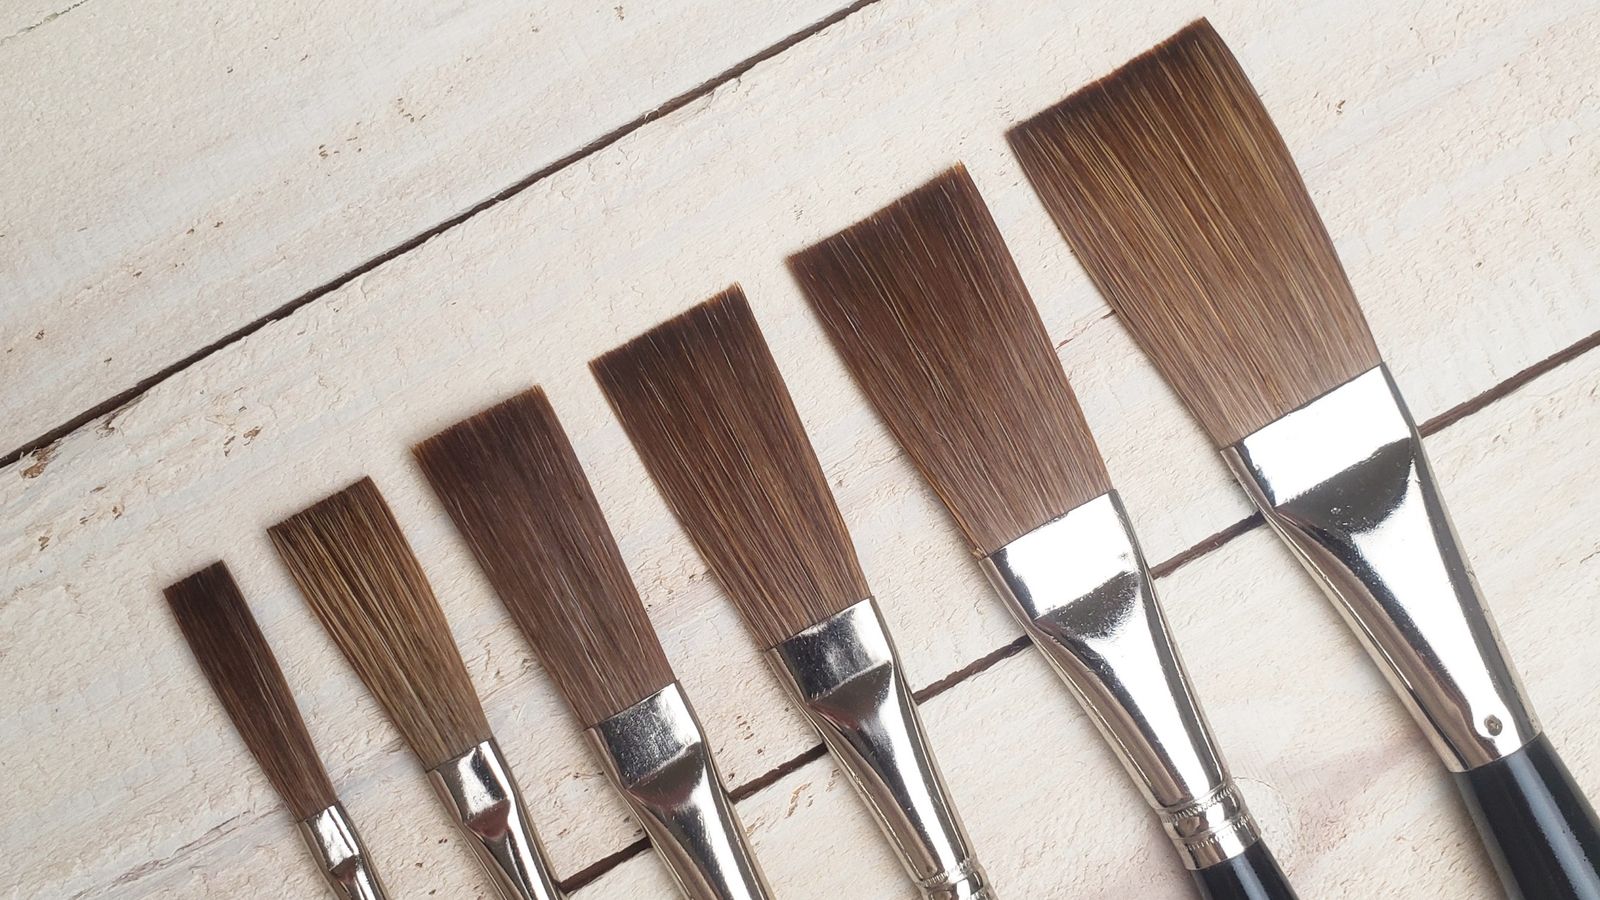 The ferrule and hairs of six flat sign painting brushes.